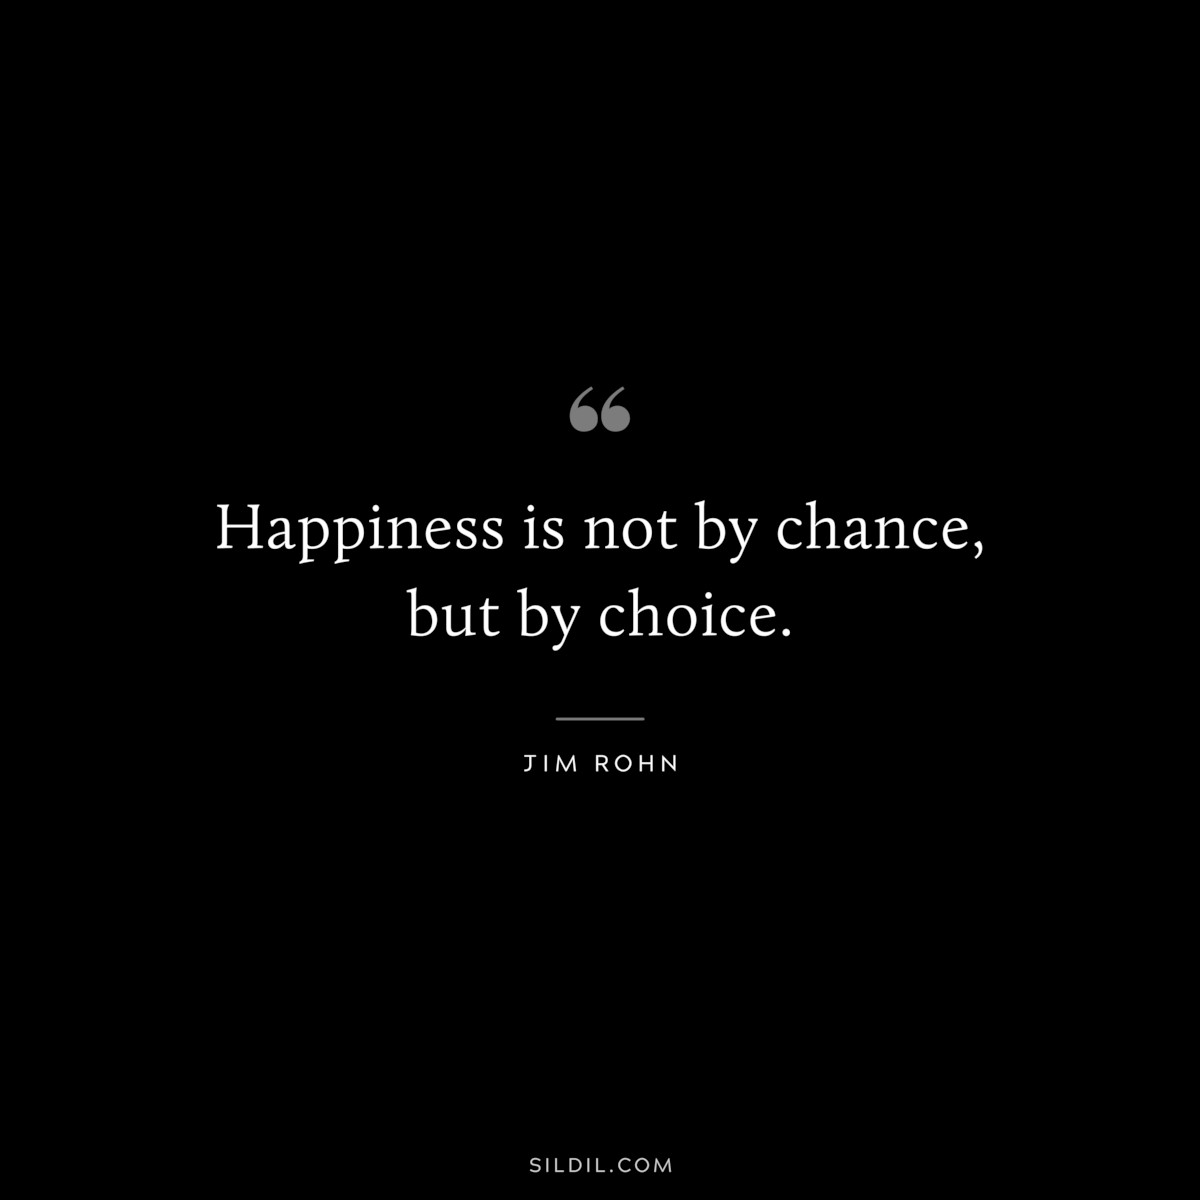 Happiness is not by chance, but by choice. ― Jim Rohn